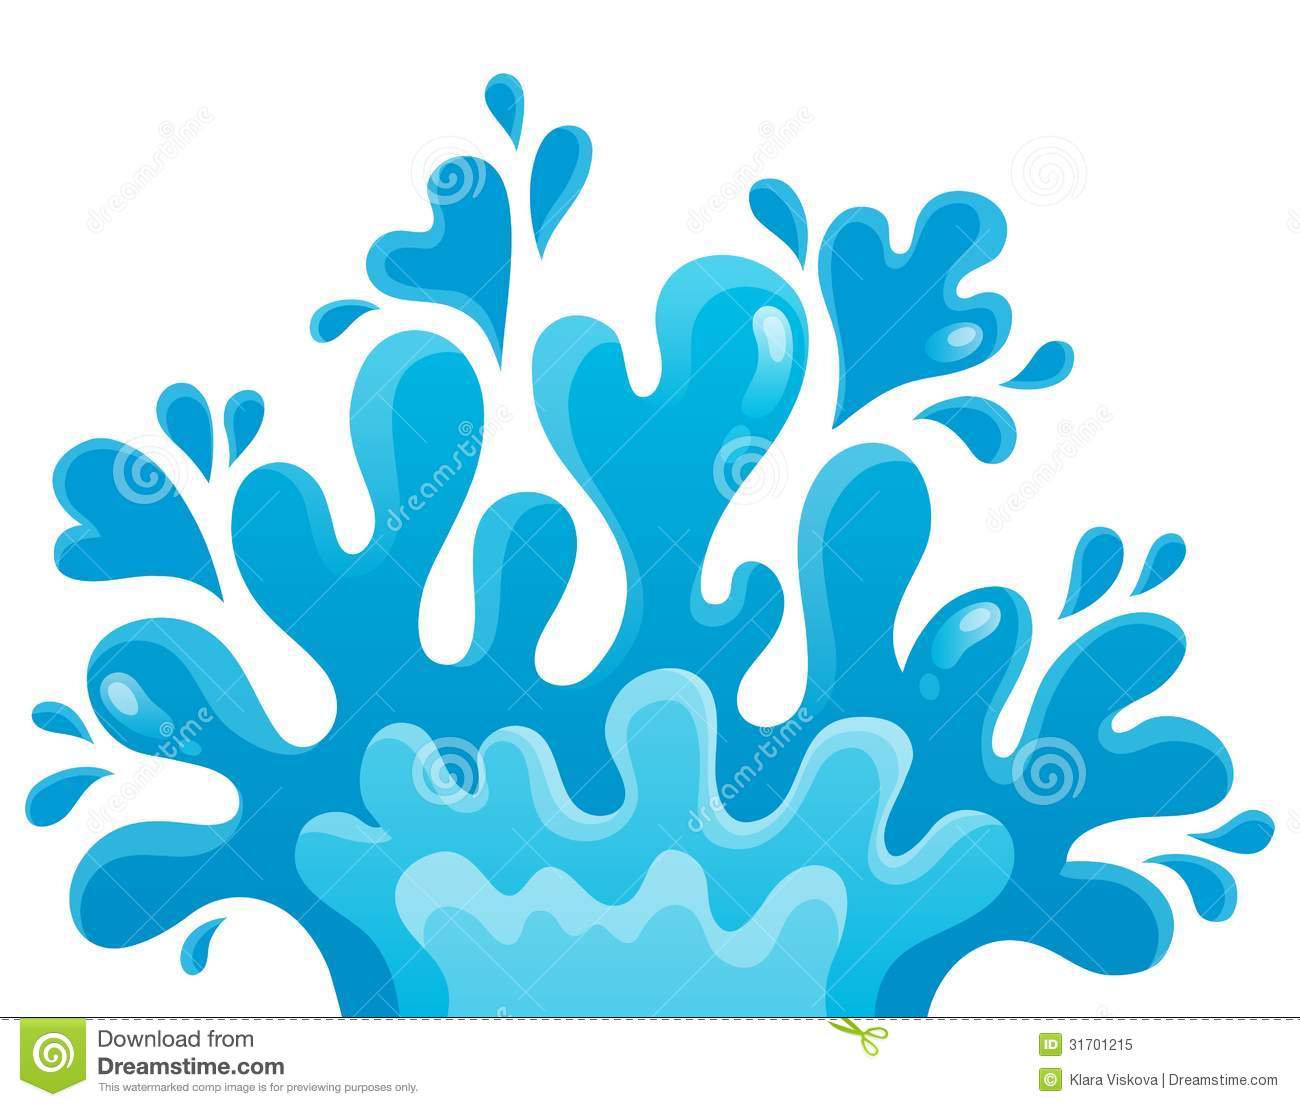 Pouring Water Clip Art